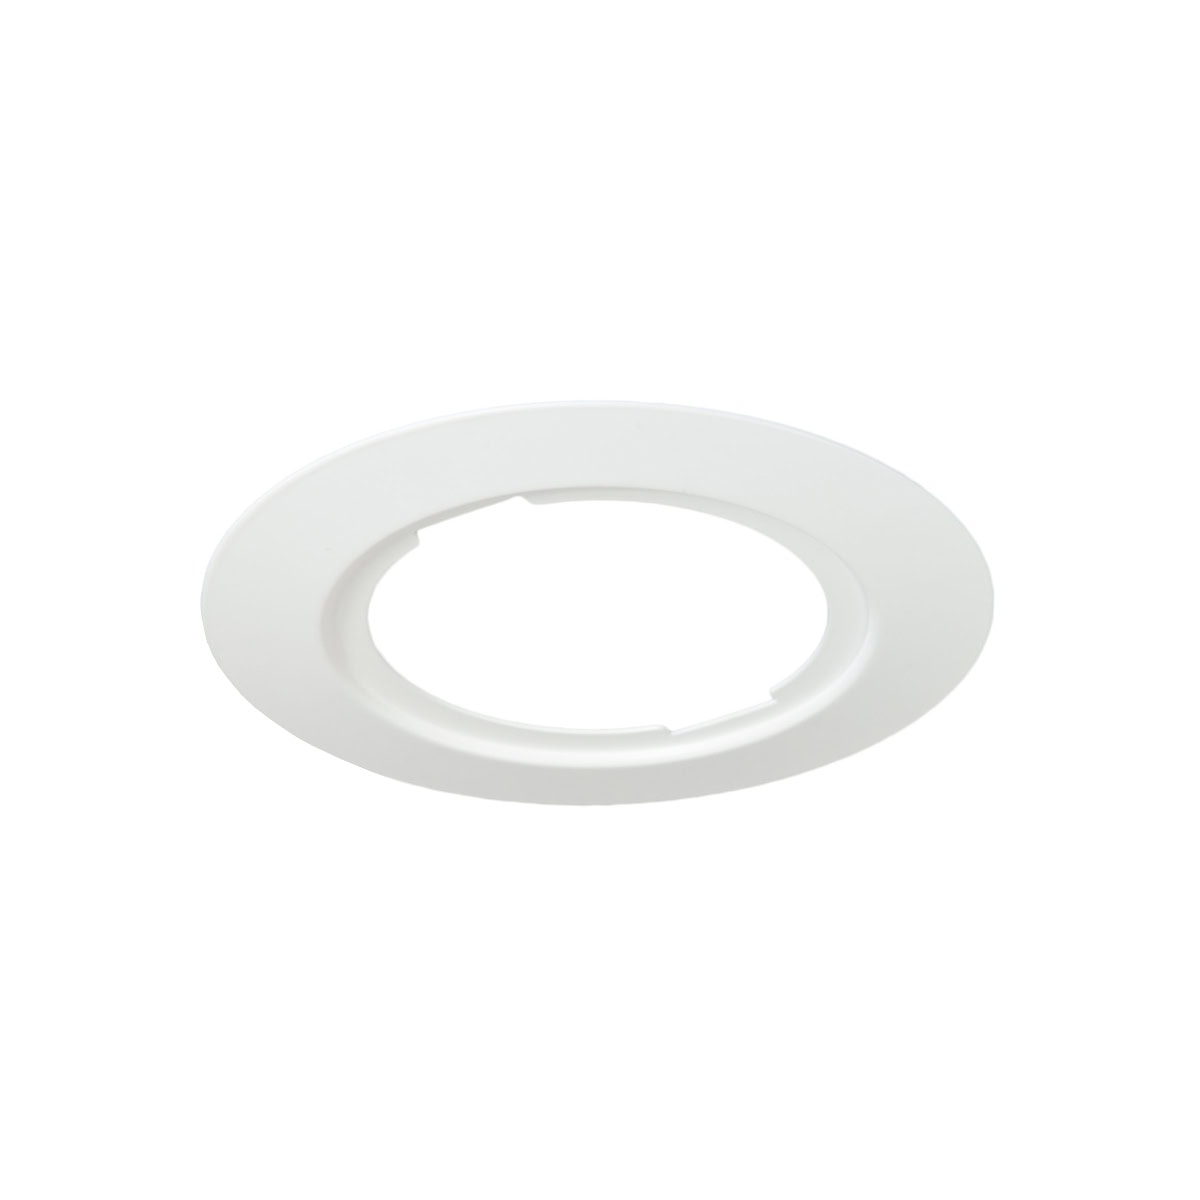 Product image of 155mm Conversion Plate for Aster LED Downlights